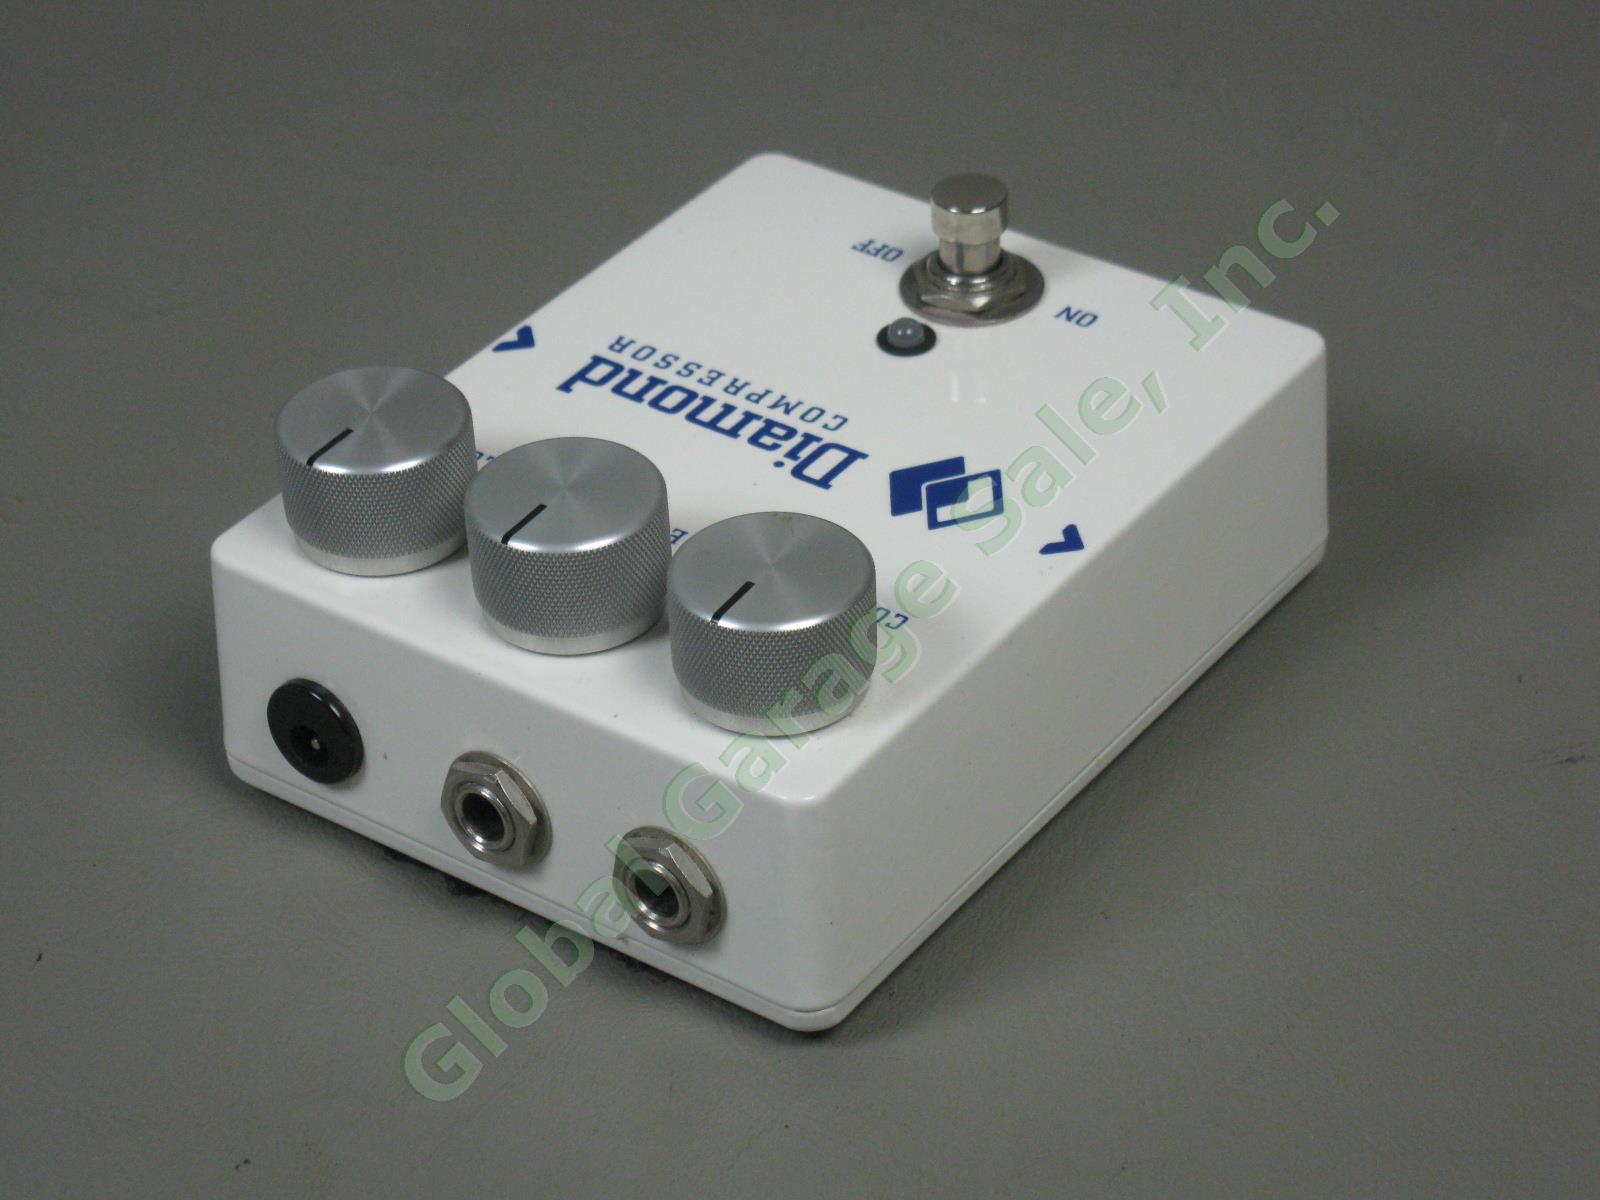 Diamond Compressor CPR-1 Guitar Effects Compression Pedal Rare White 1 Owner EXC 2